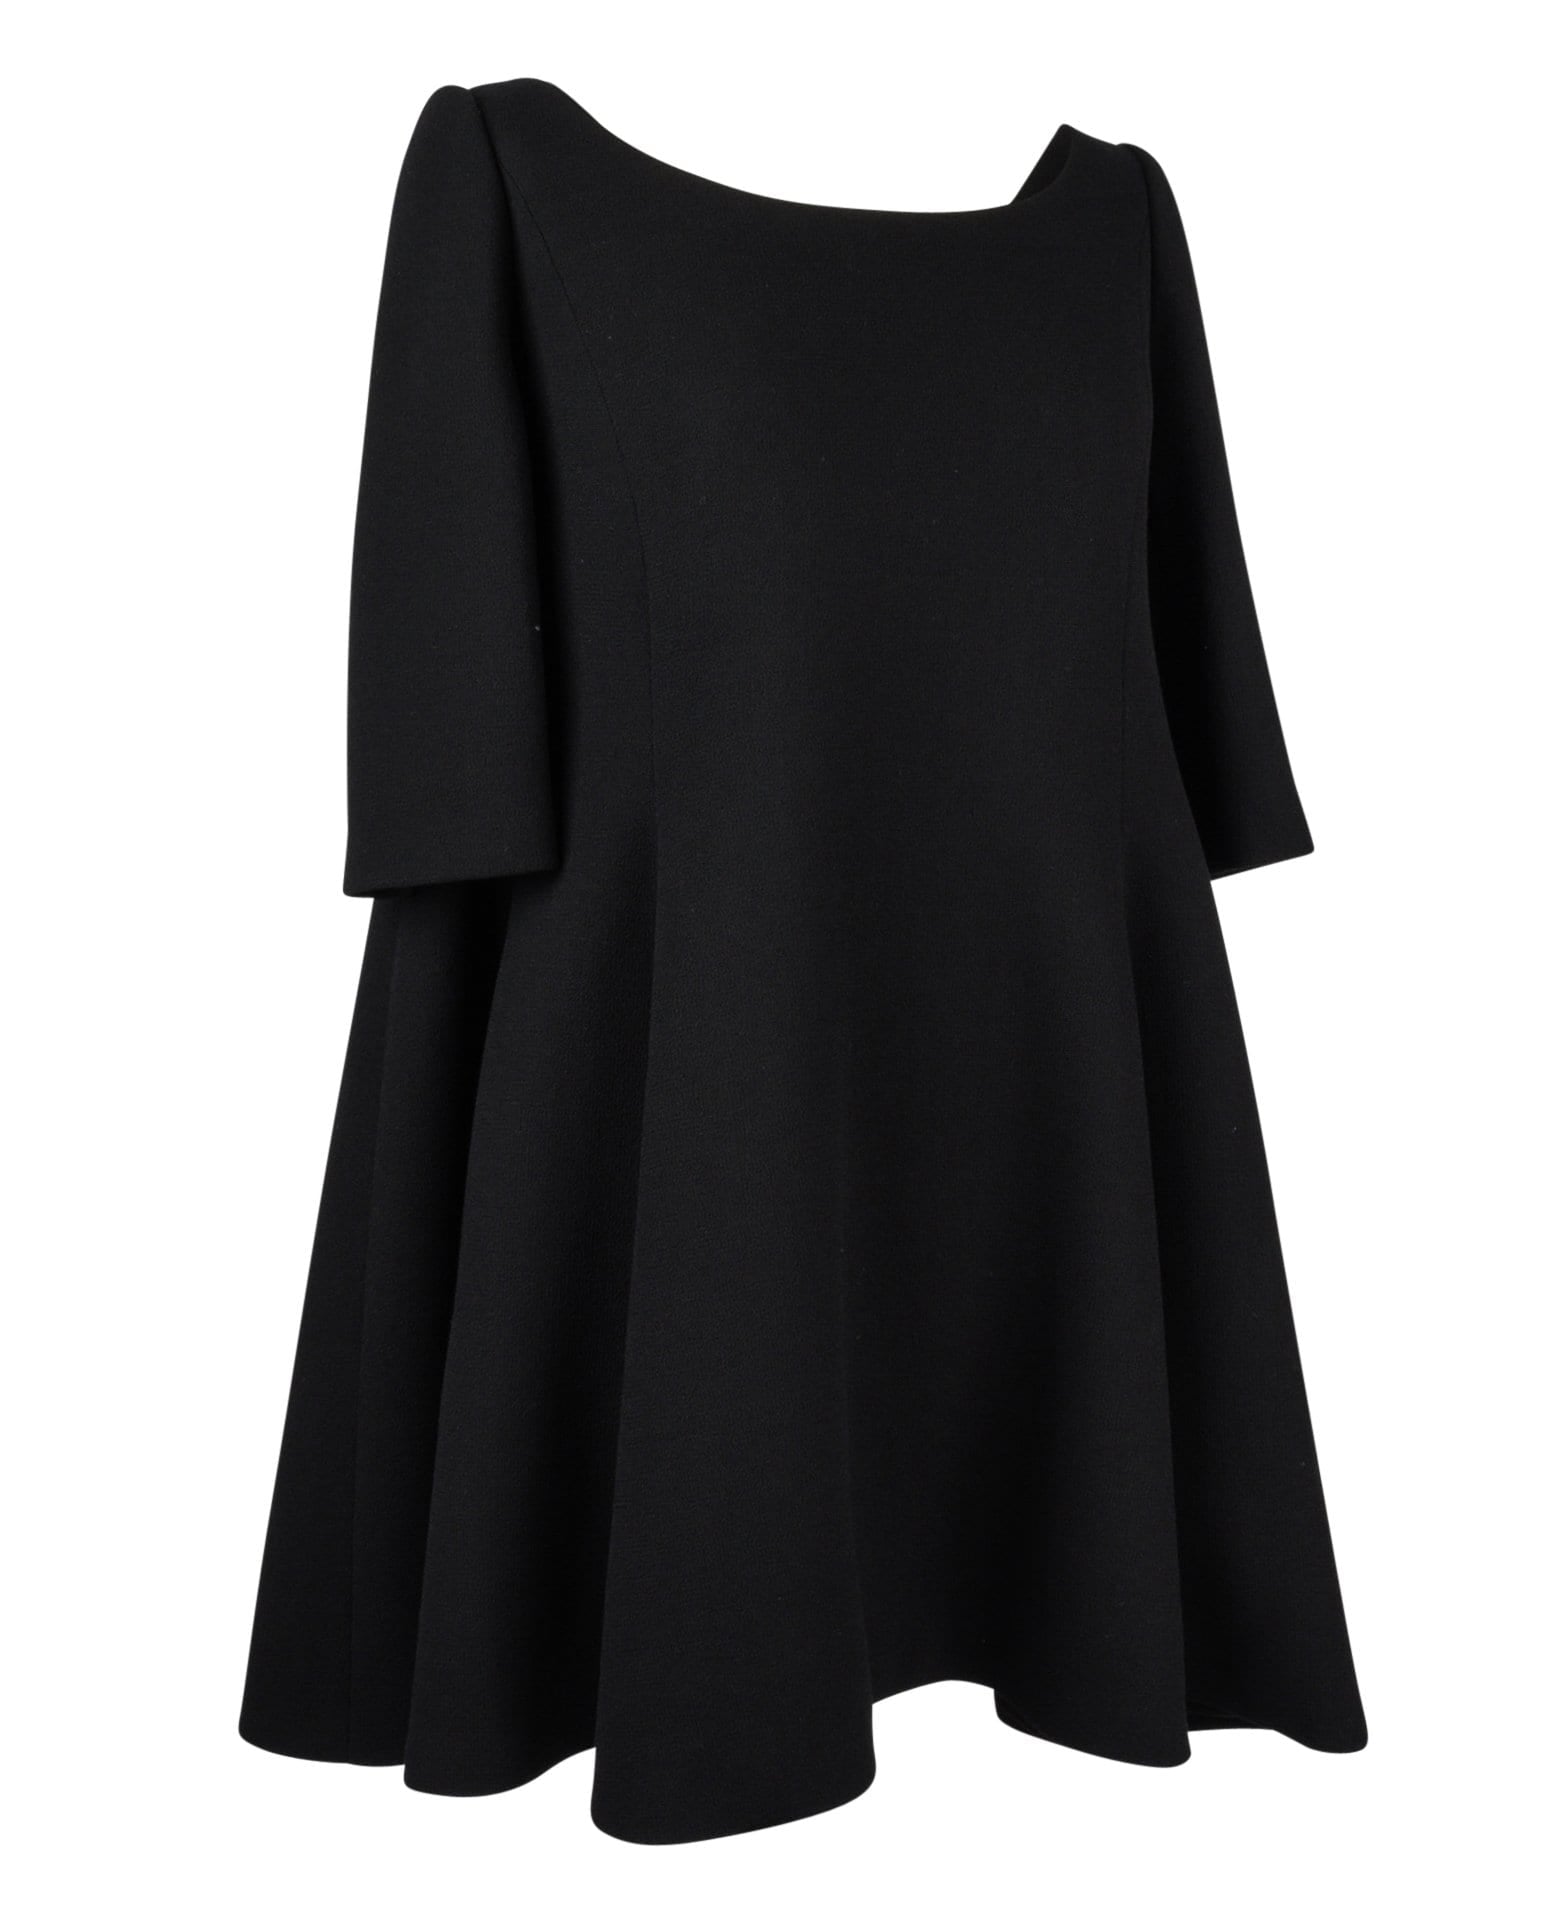 Christian Dior Dress Babydoll Style Elbow Length Sleeve Black Fits 6 to 8 - mightychic